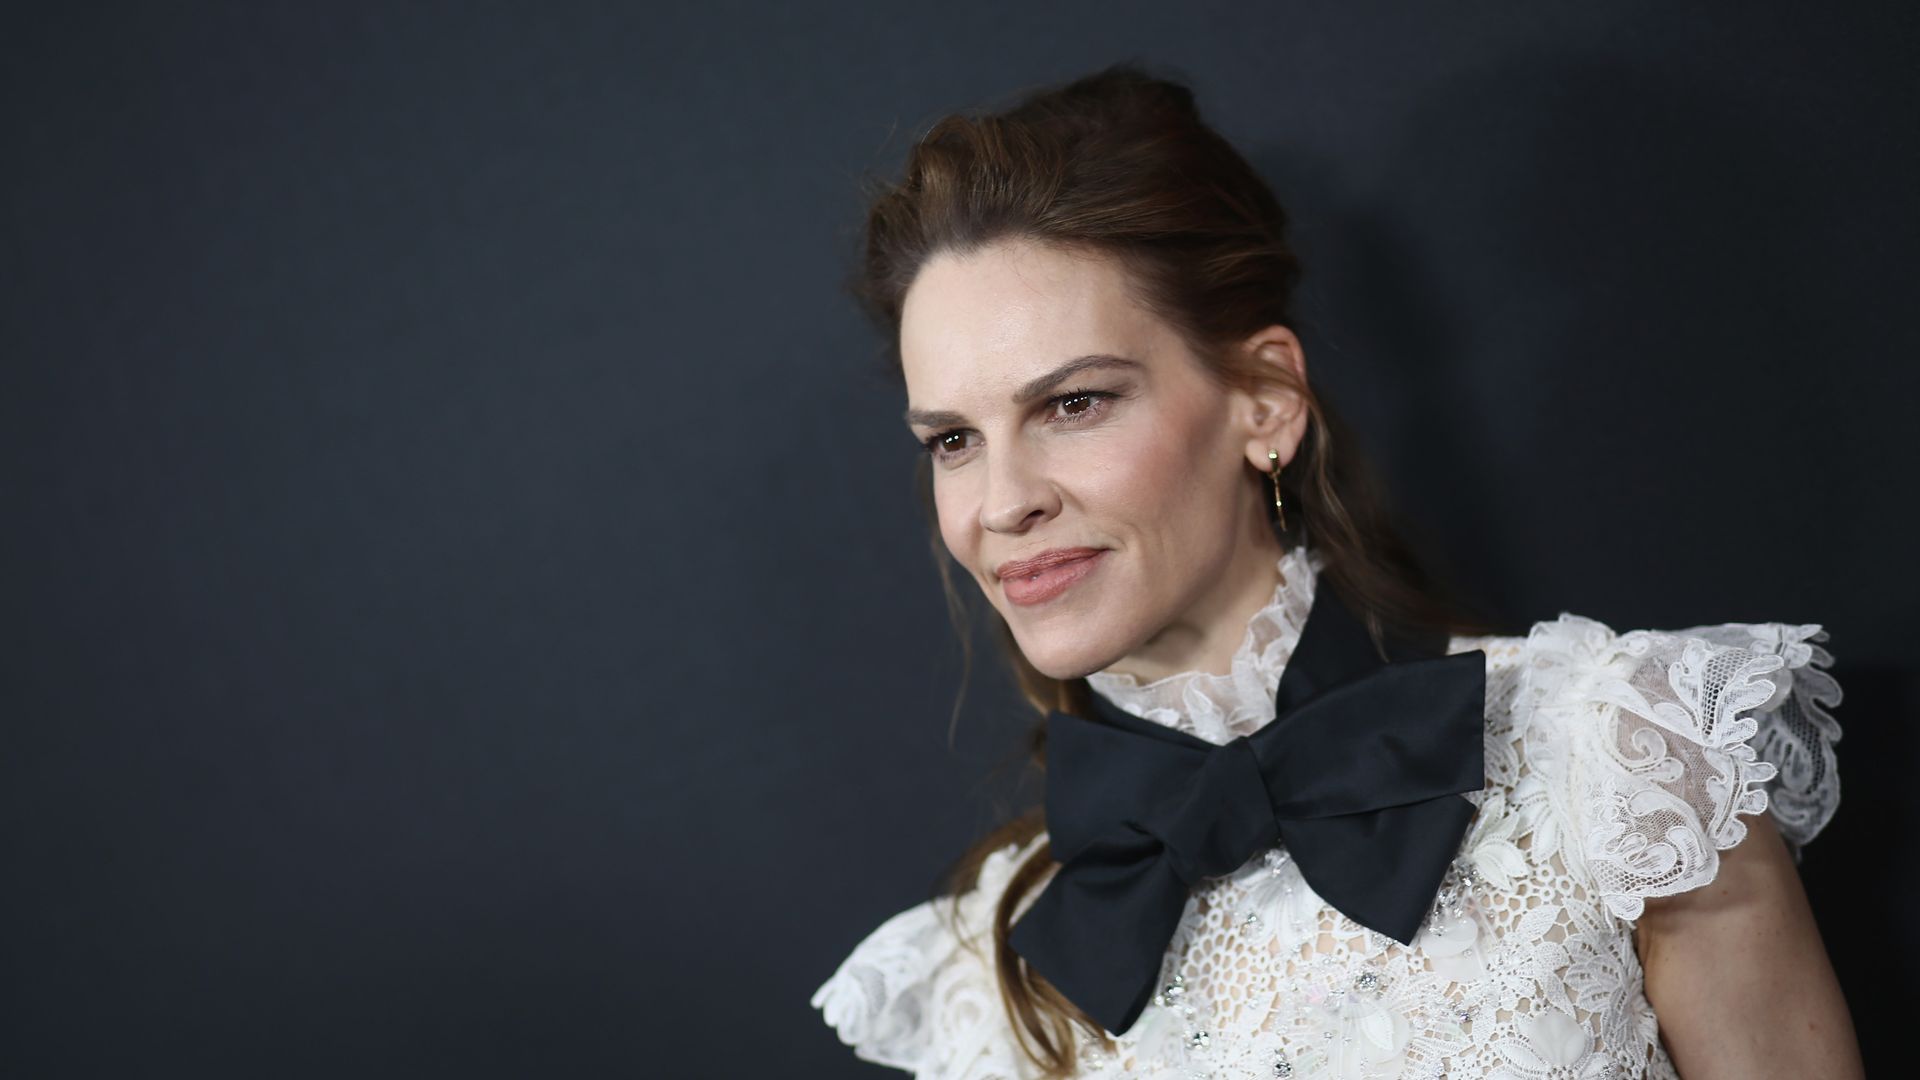 Hilary Swank attends the Premiere Of Universal Pictures' "The Hunt" at ArcLight Hollywood on March 09, 2020 in Hollywood, California.